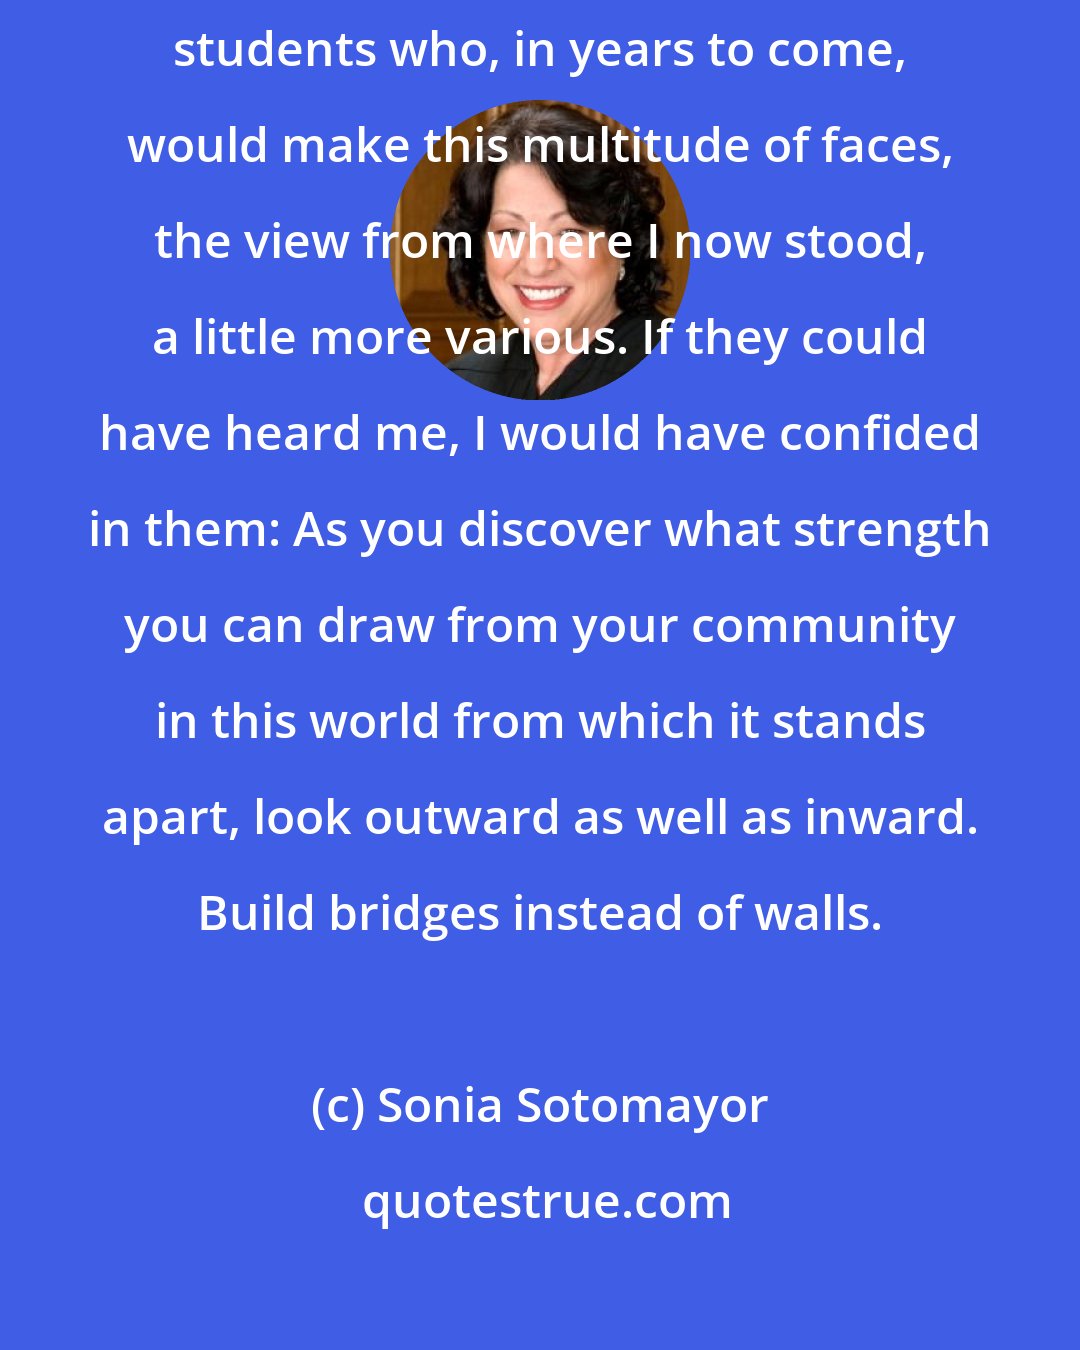 Sonia Sotomayor: Looking out at that crowd, I imagined those who had not yet arrived, minority students who, in years to come, would make this multitude of faces, the view from where I now stood, a little more various. If they could have heard me, I would have confided in them: As you discover what strength you can draw from your community in this world from which it stands apart, look outward as well as inward. Build bridges instead of walls.